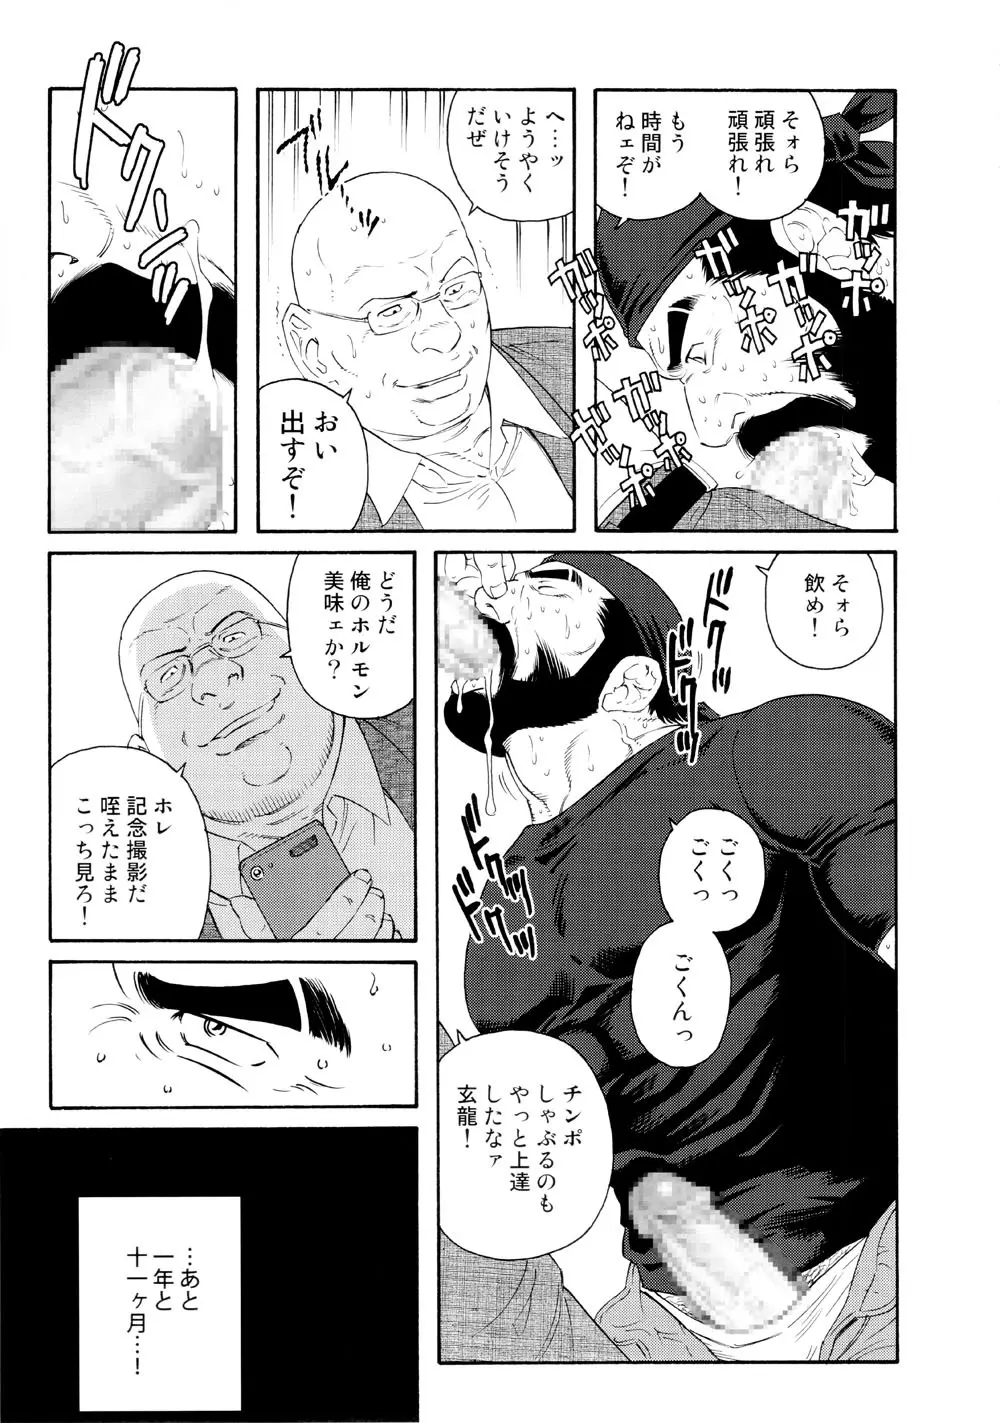 Genryu Chapter 3 Page.3